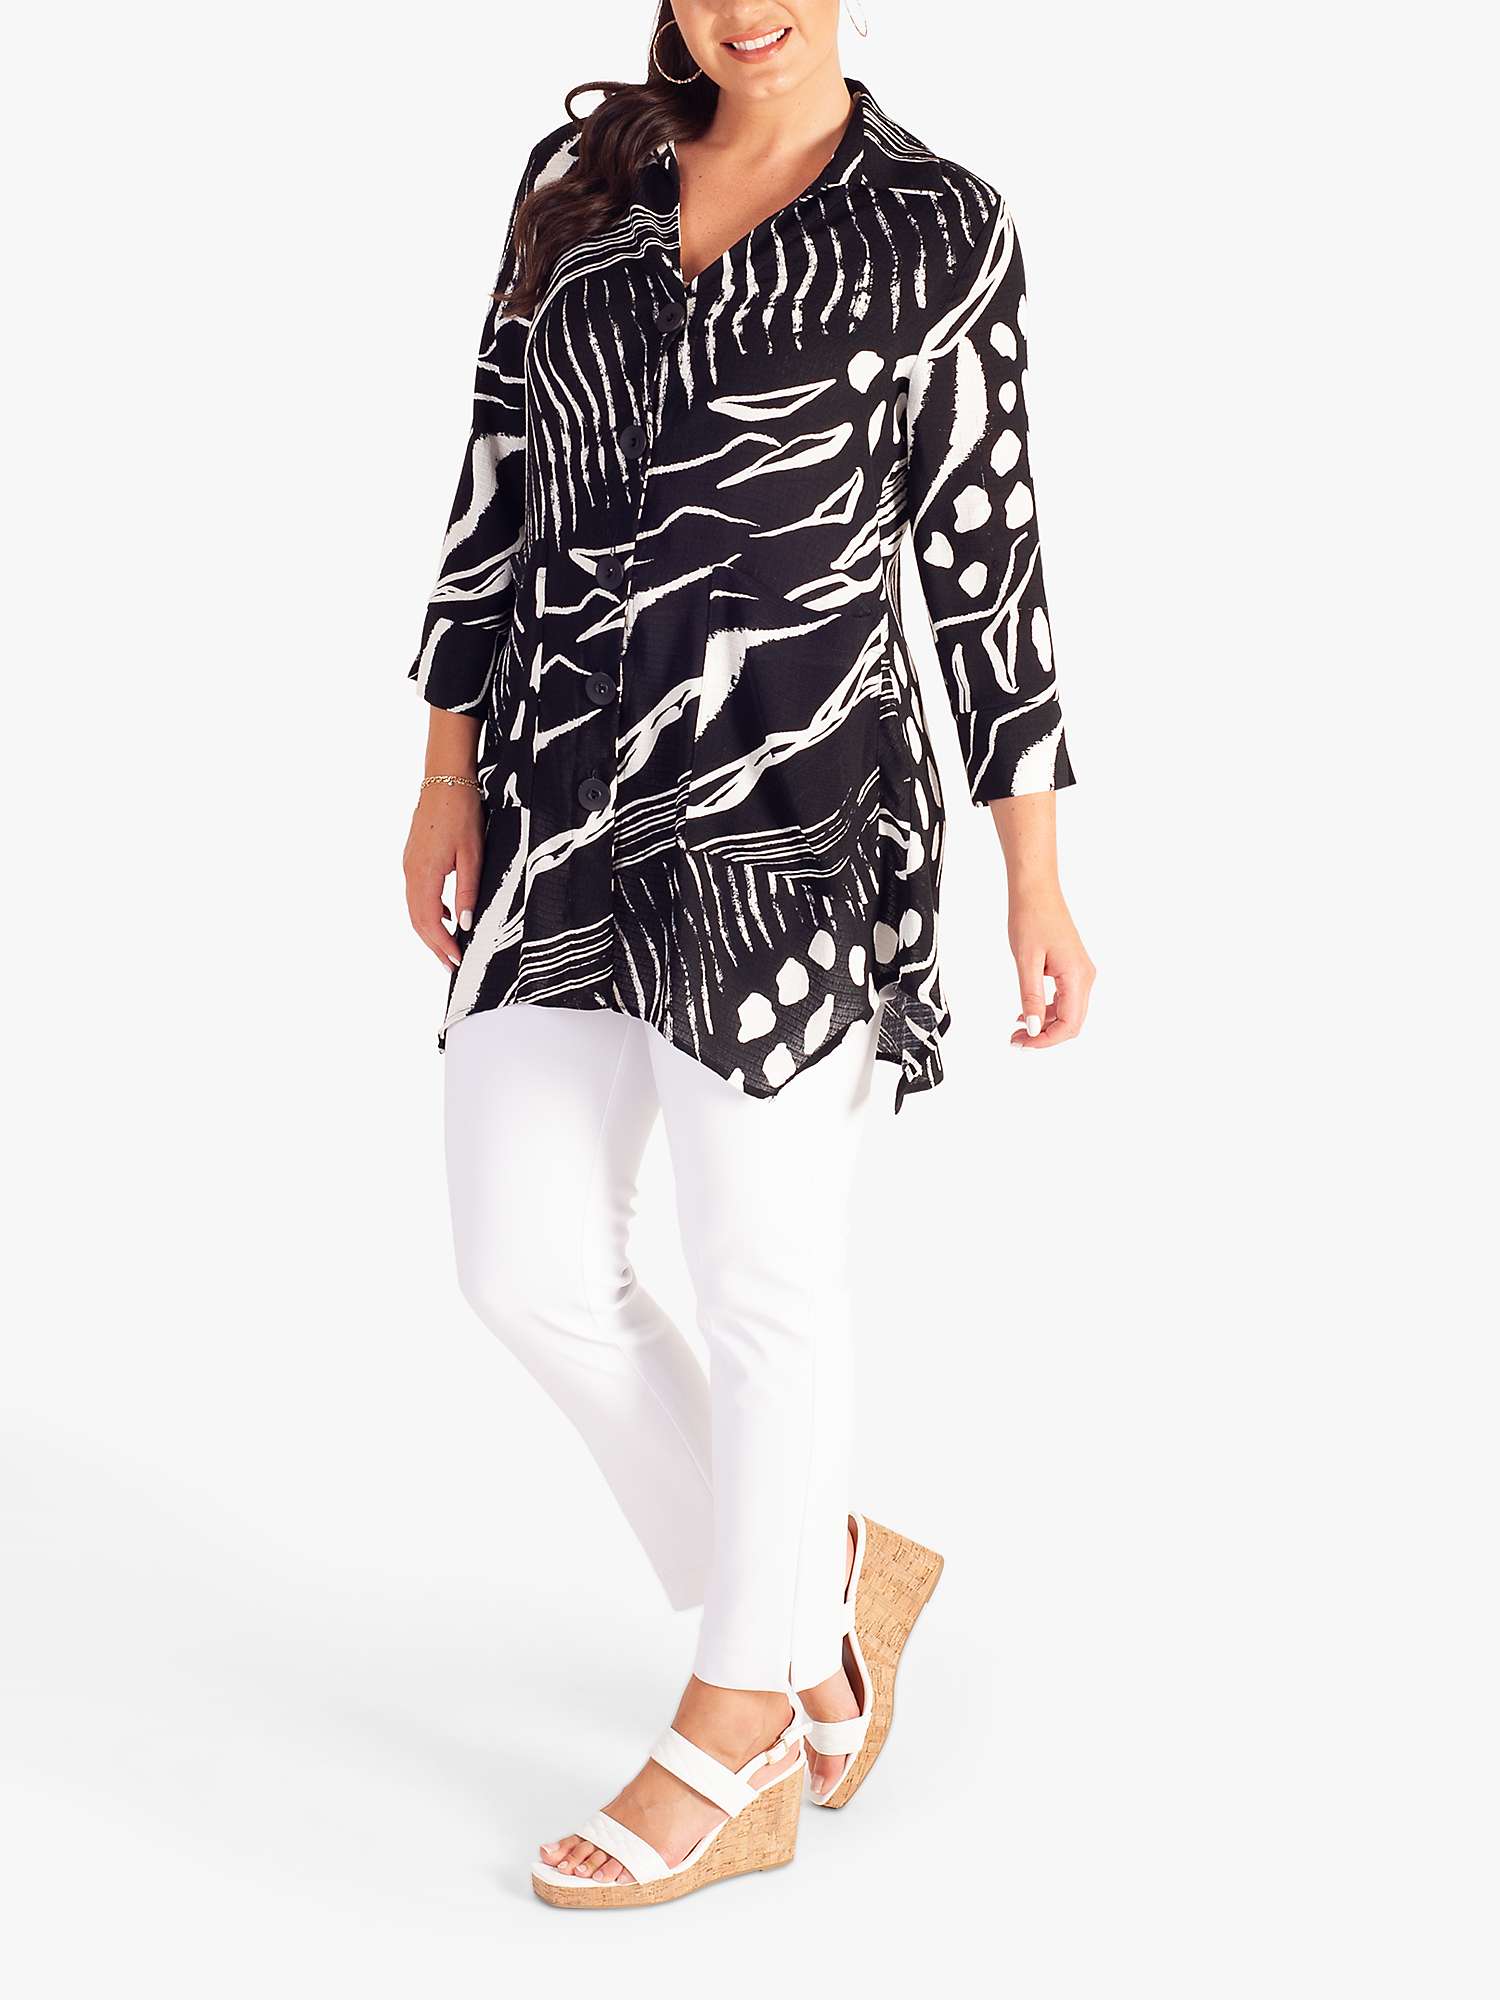 Buy chesca Button Front Abstract Print Blouse, Black/White Online at johnlewis.com